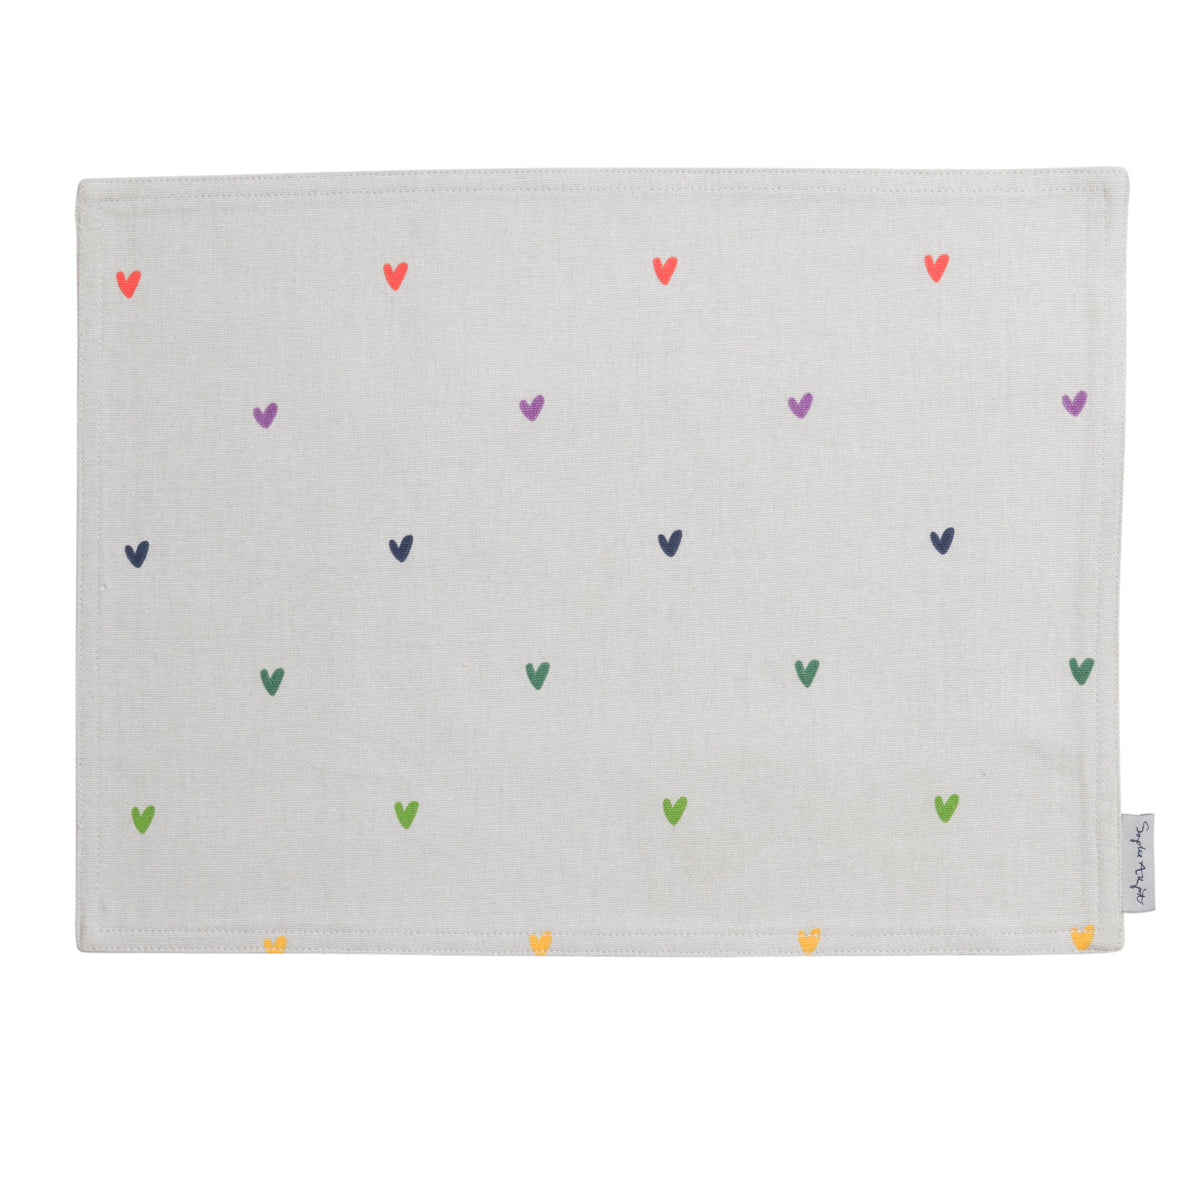 Multicoloured Hearts Fabric Placemat by Sophie Allport